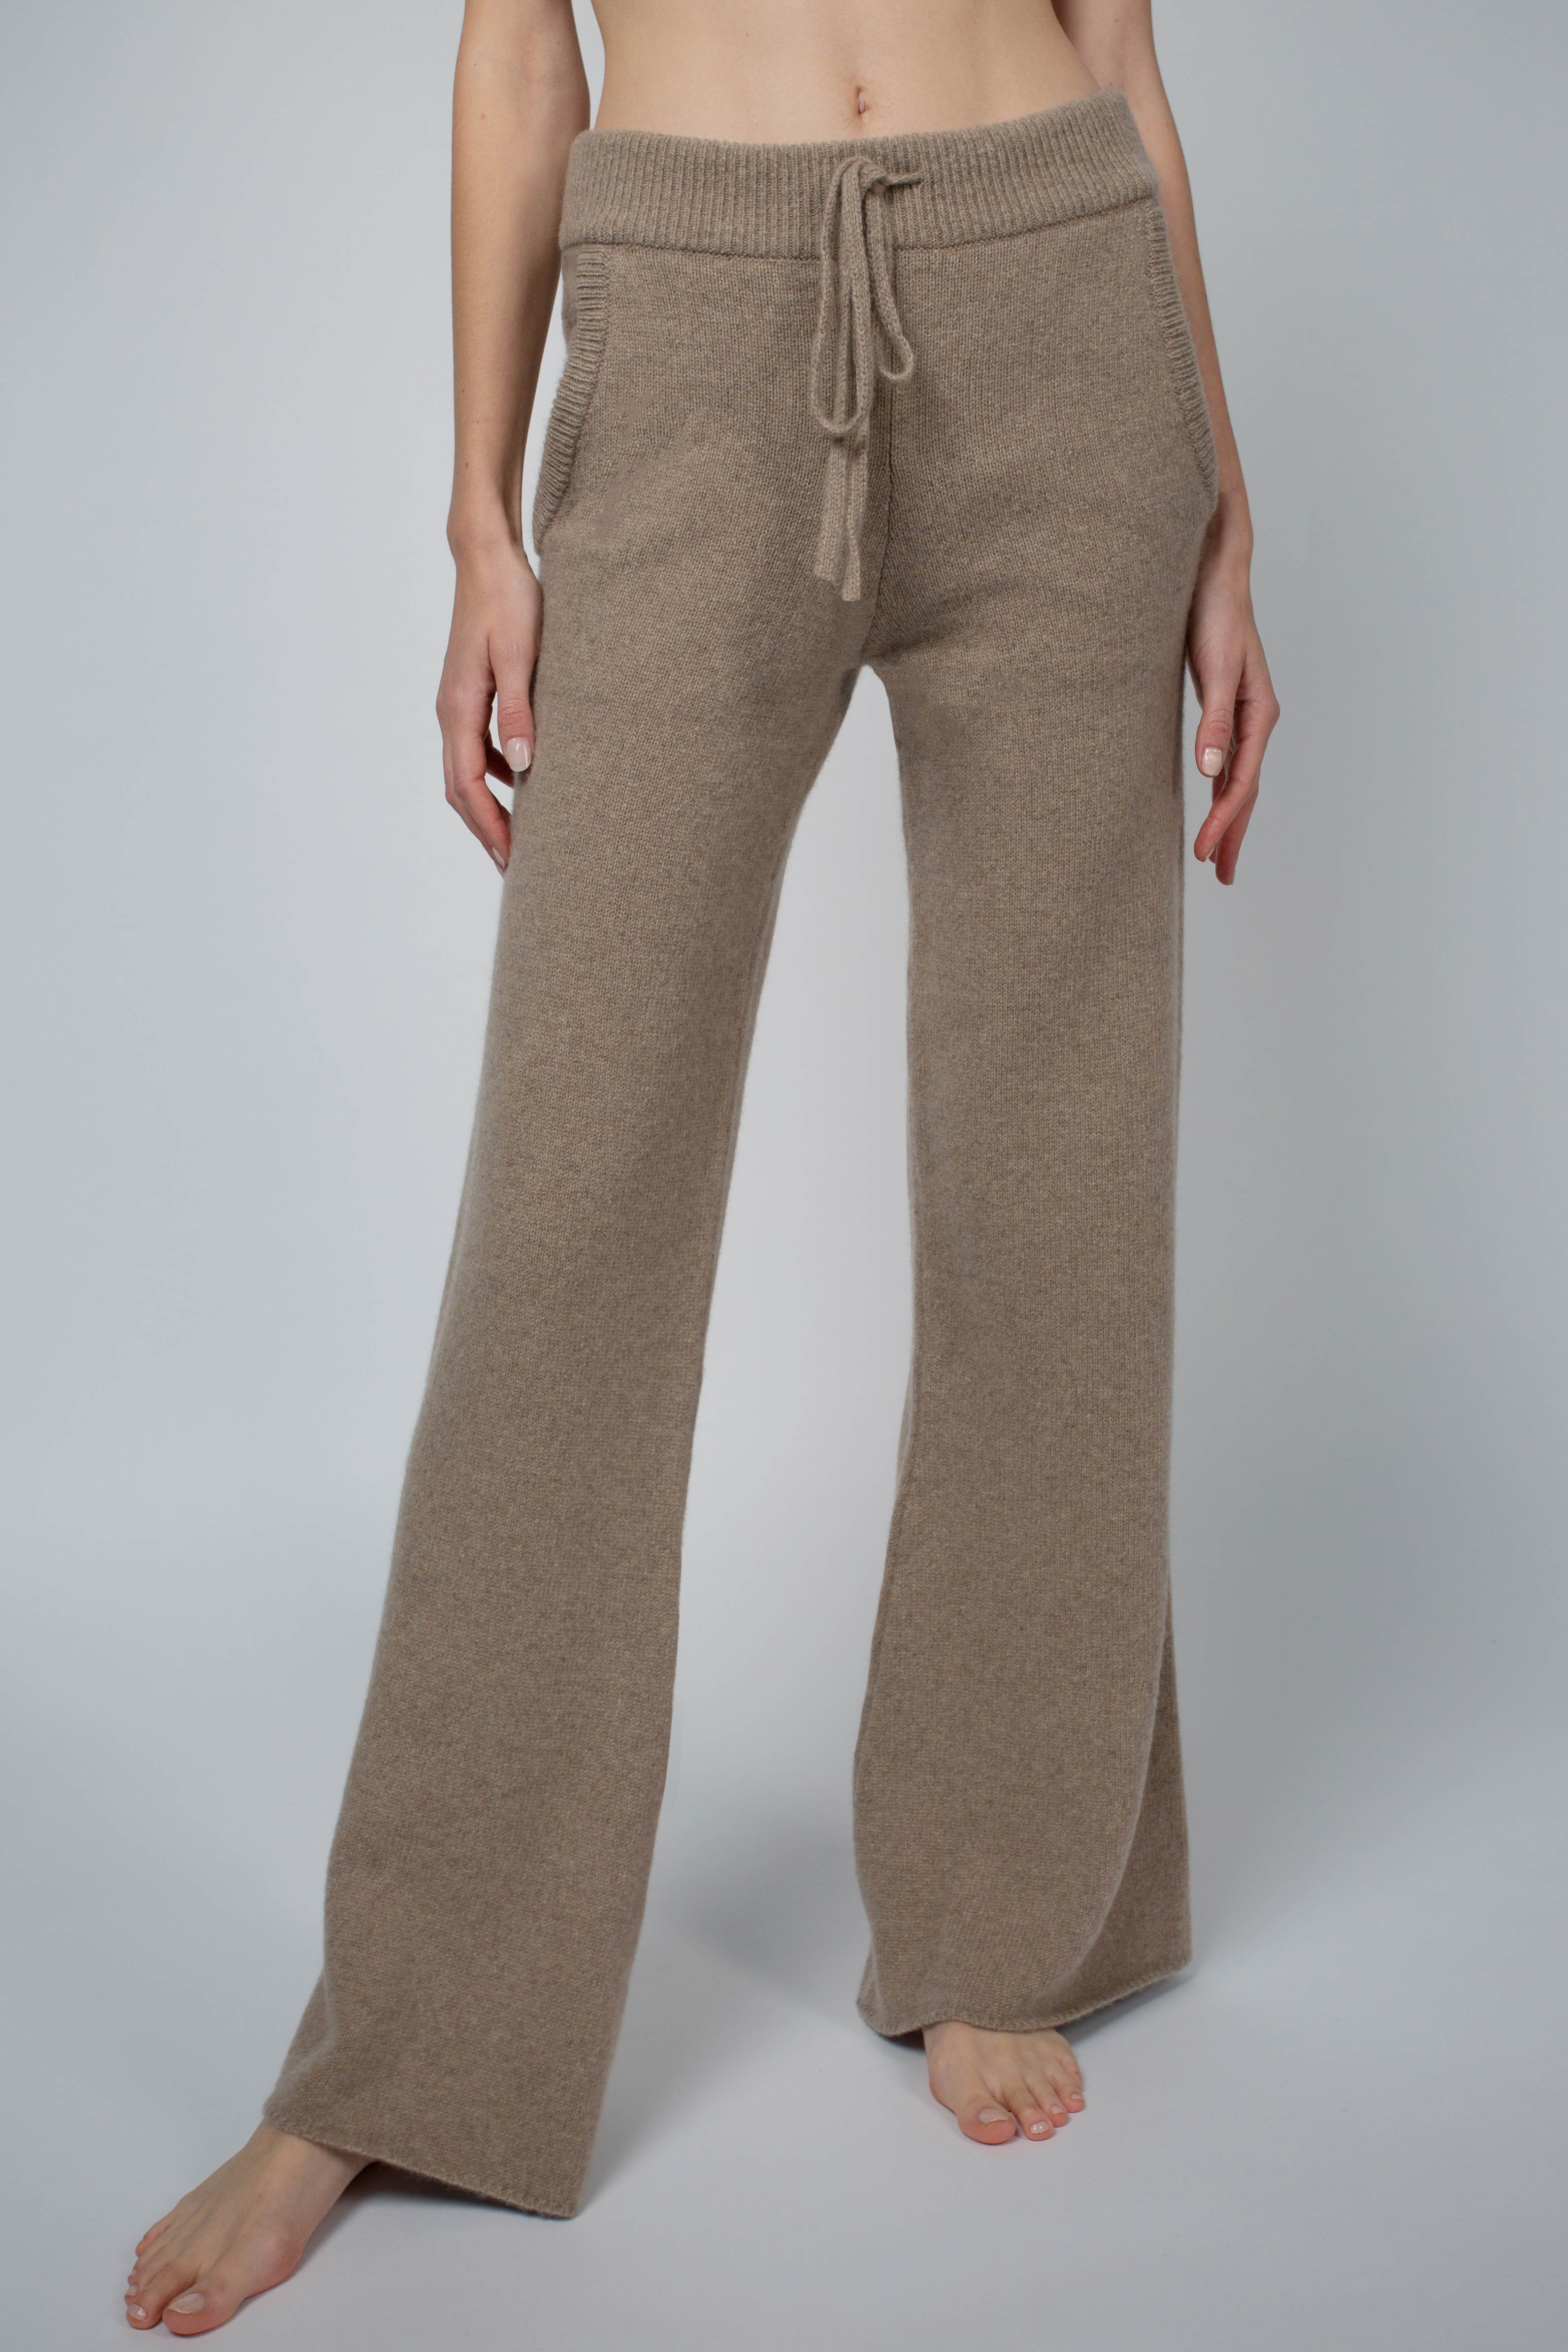 SANTICLER Flare Leg Cashmere Lounge Pant in Fawn – Santicler